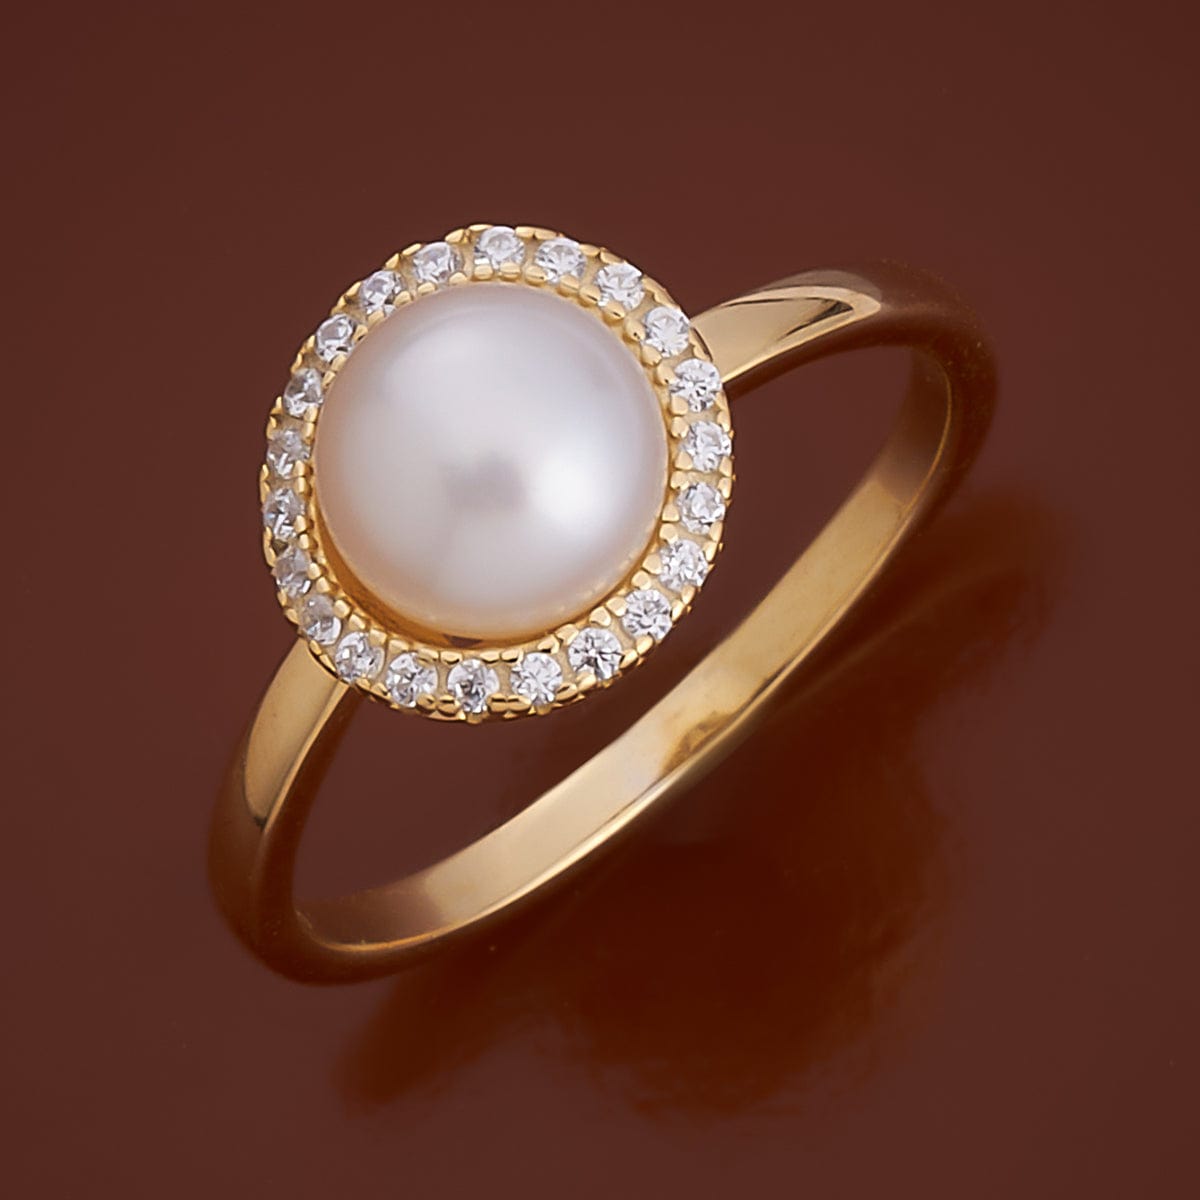 Buy Gold Pearl Ring Online In India - Etsy India